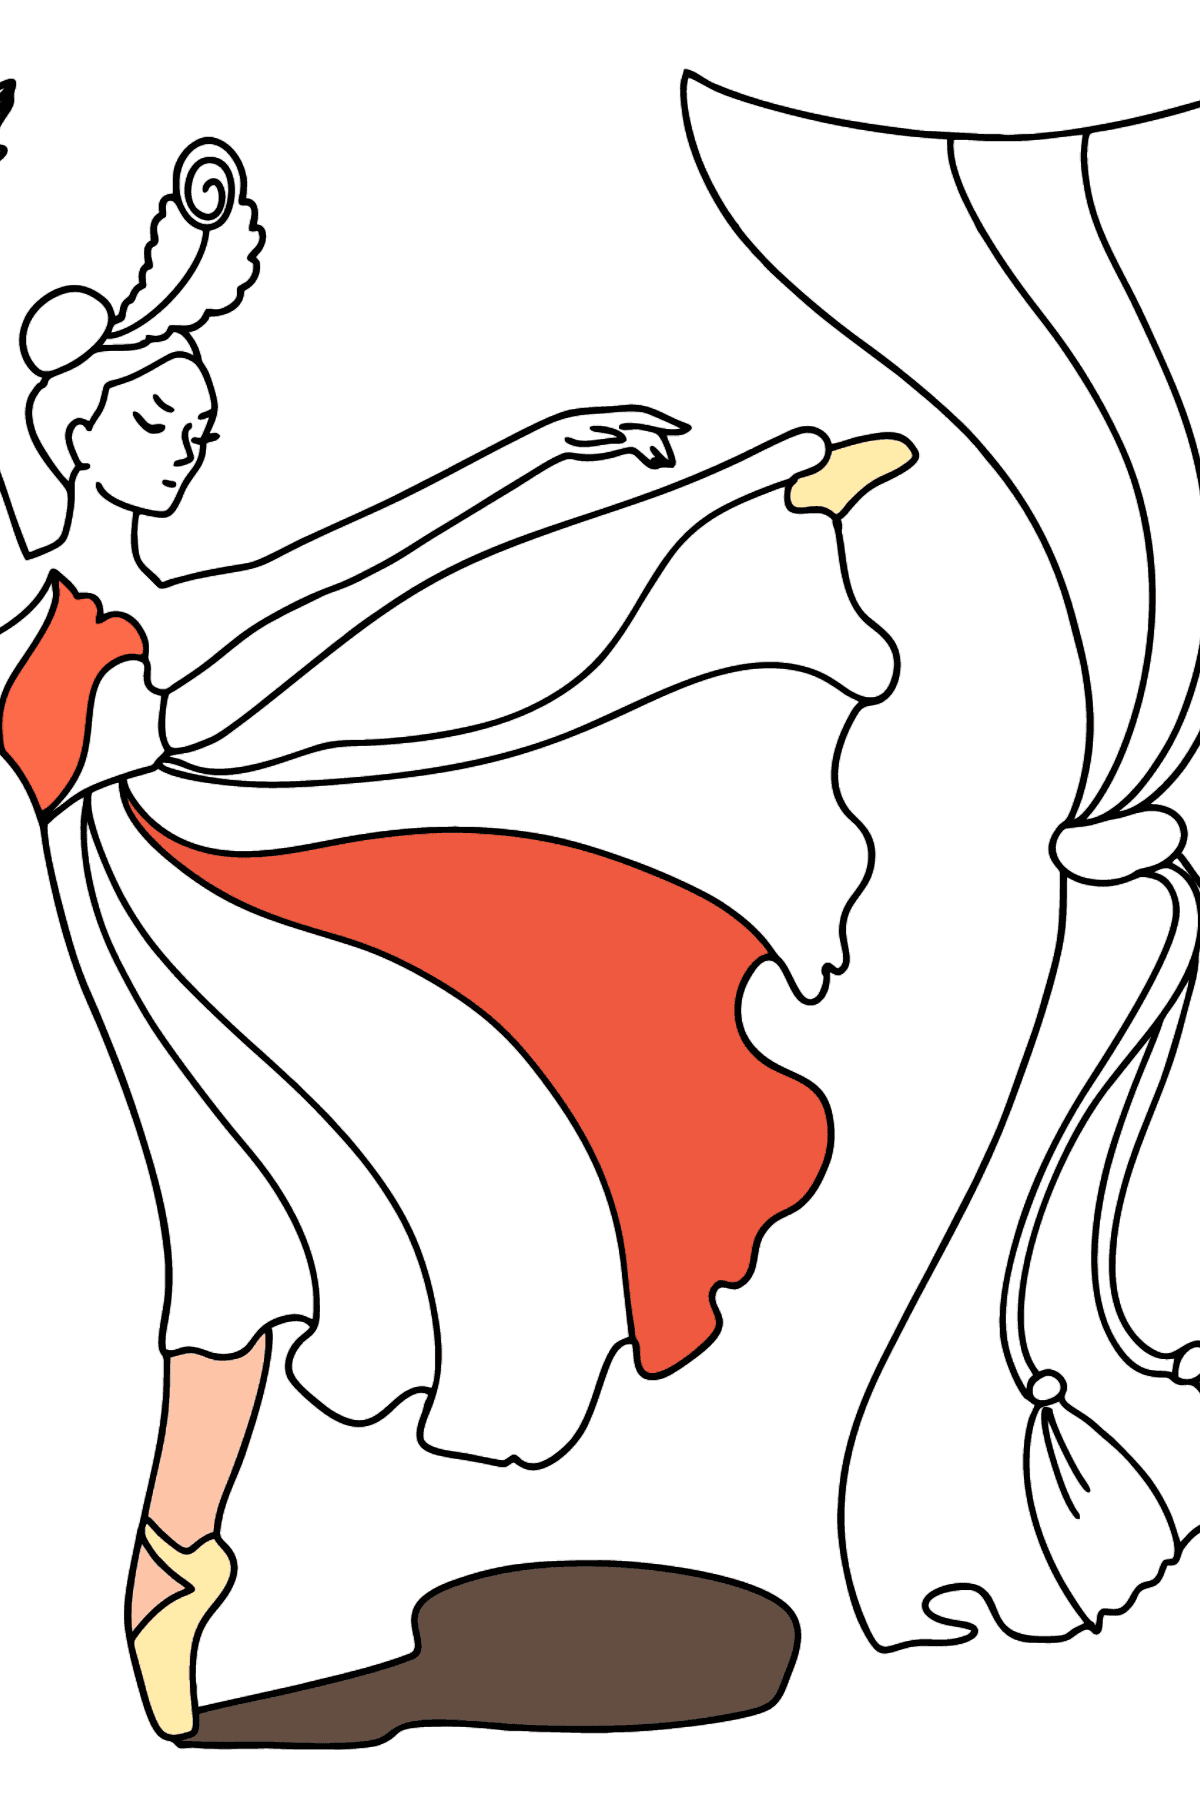 Ballerina in Red Dress coloring page - Coloring Pages for Kids